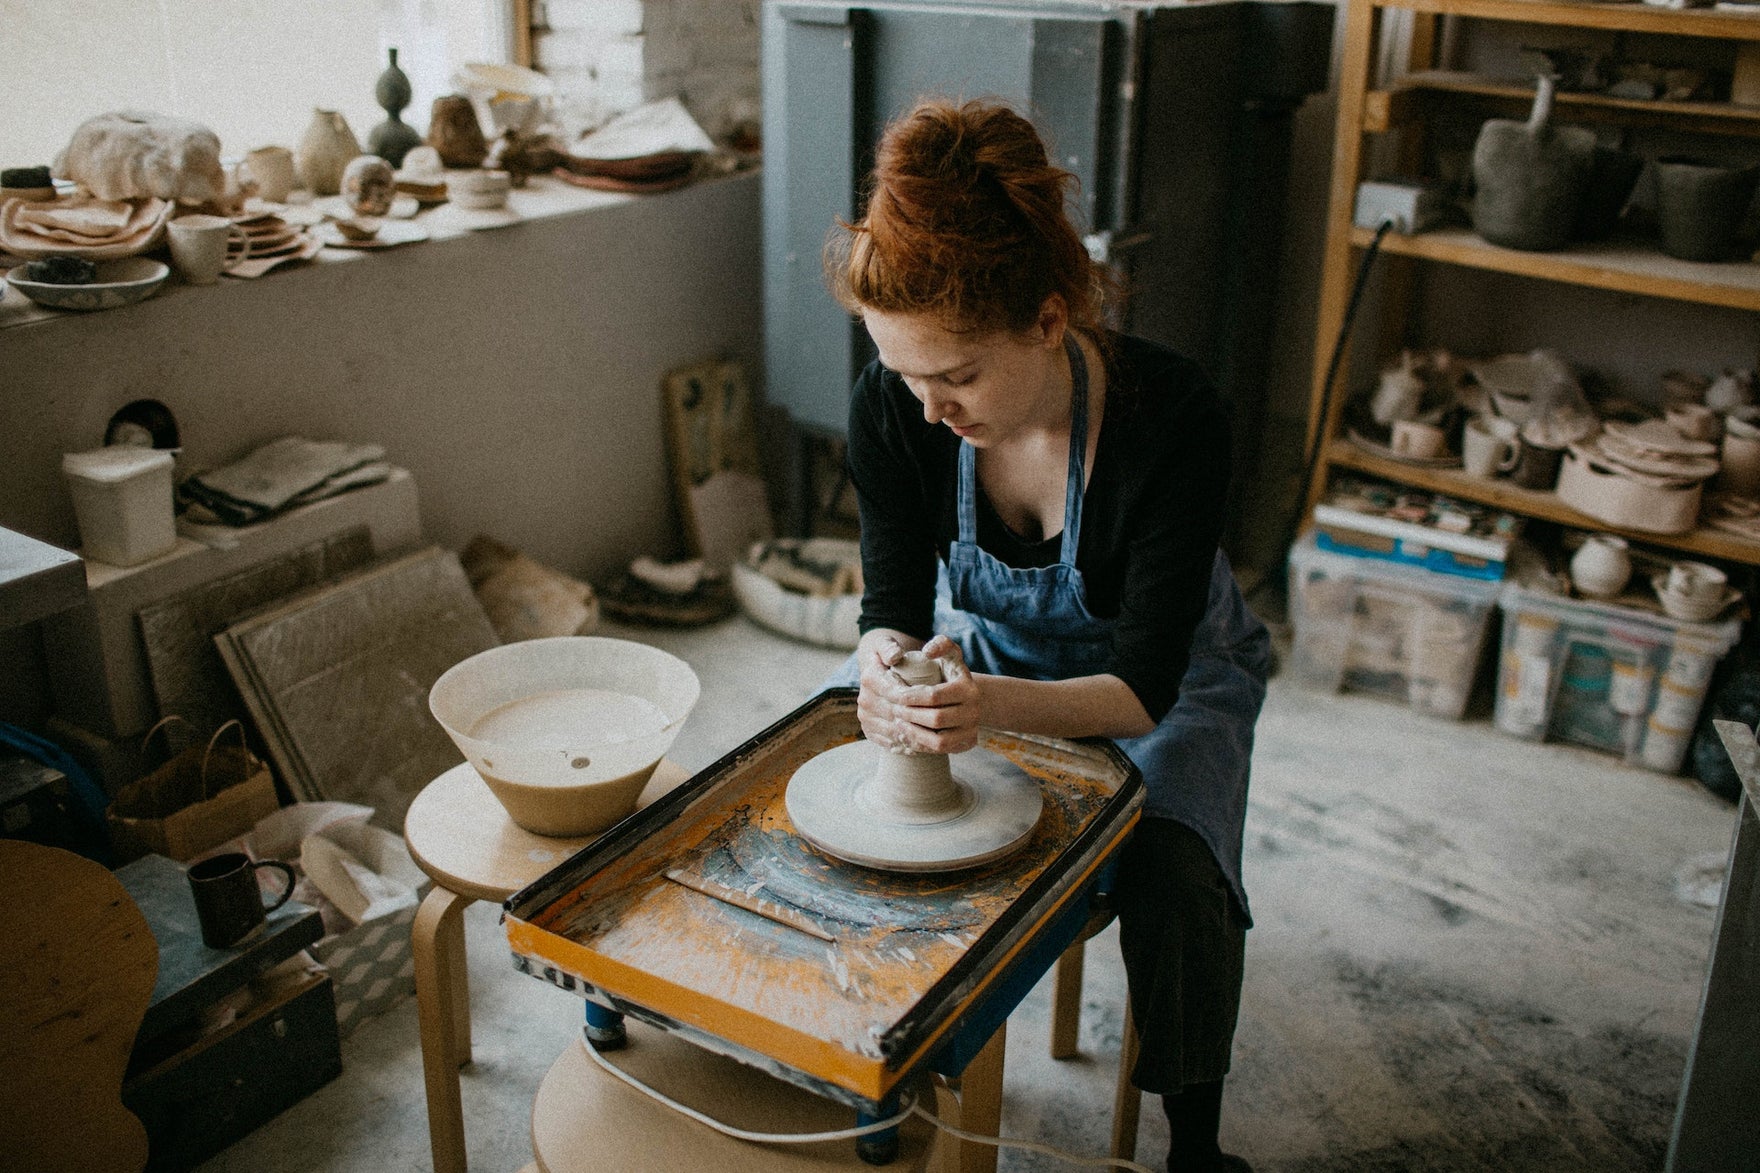 A woman works with clay on a ceramics wheel in a studio